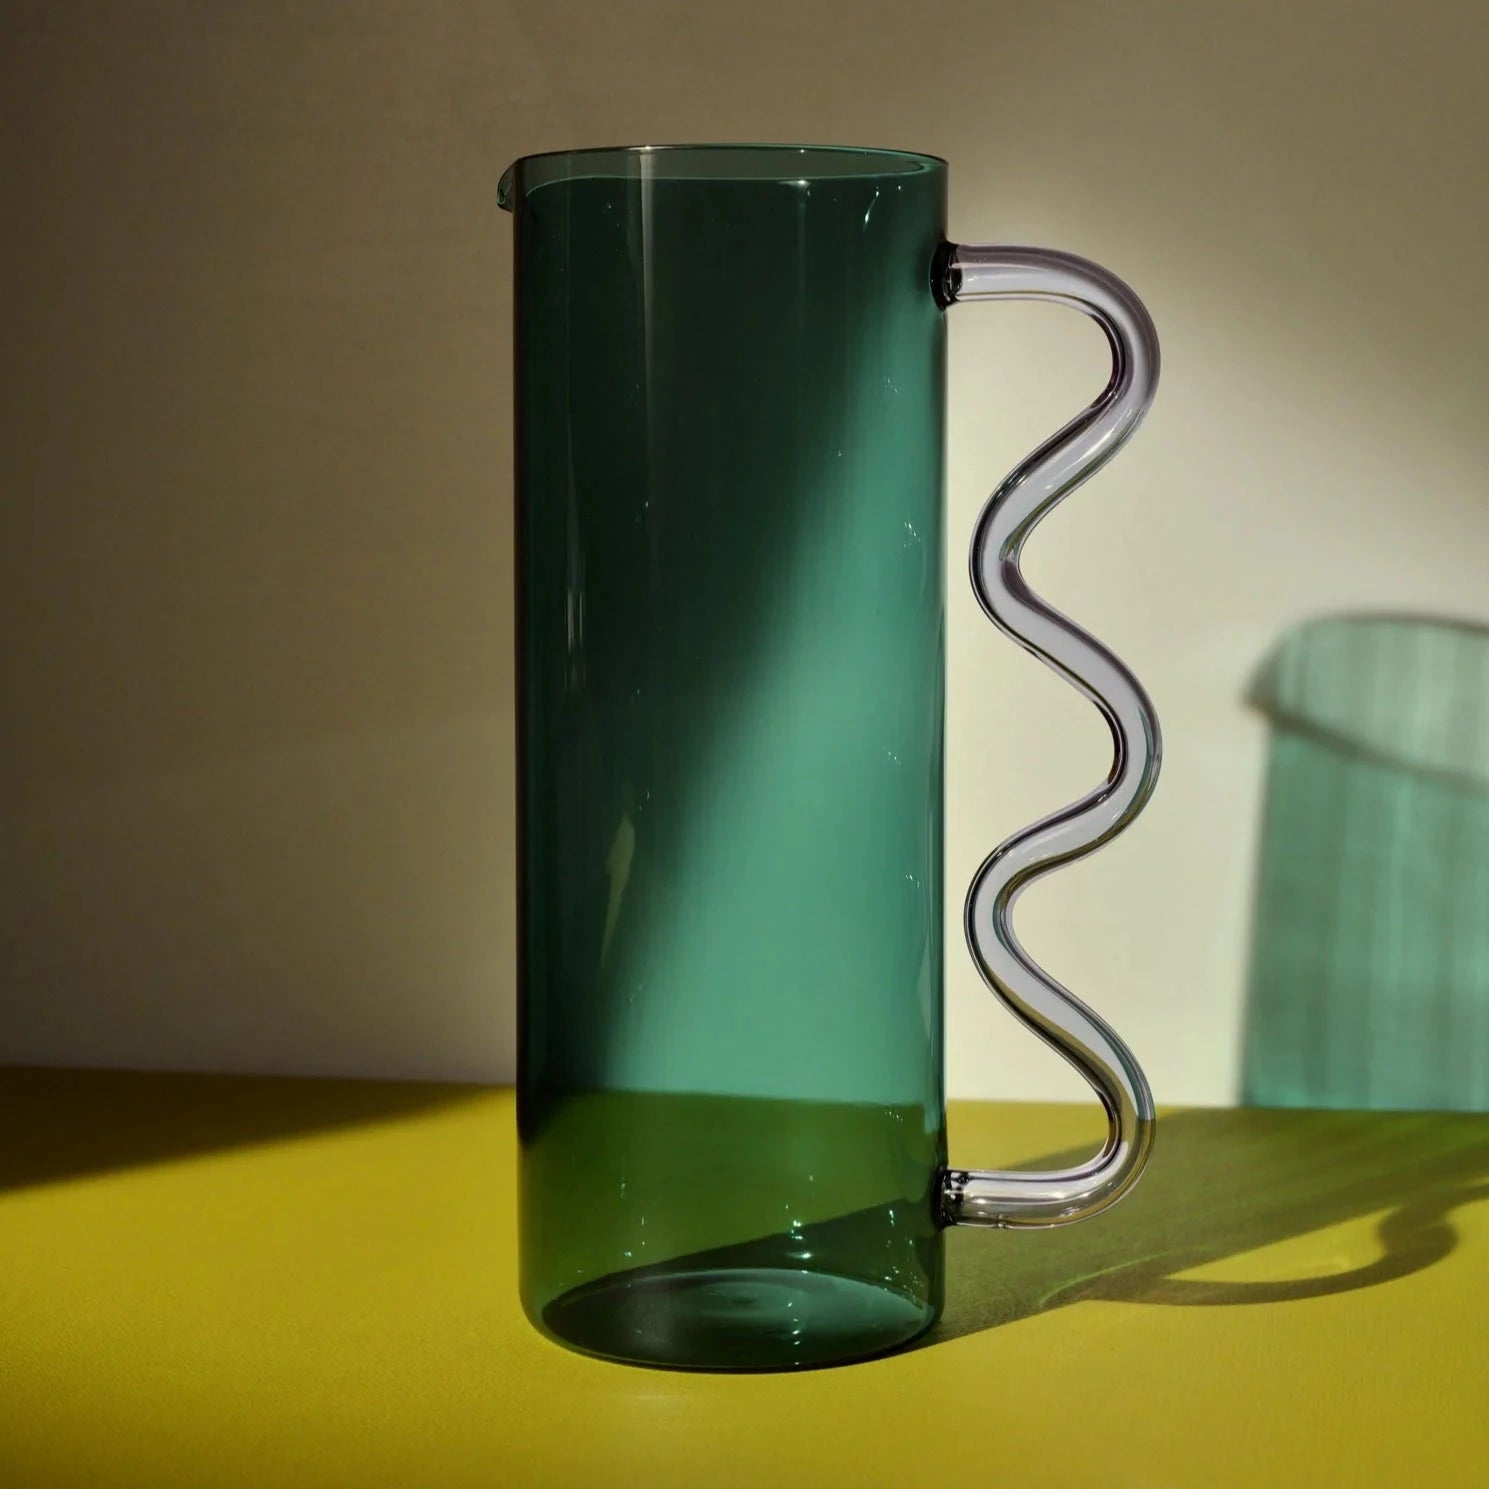 Wave Pitcher - Teal with Lilac